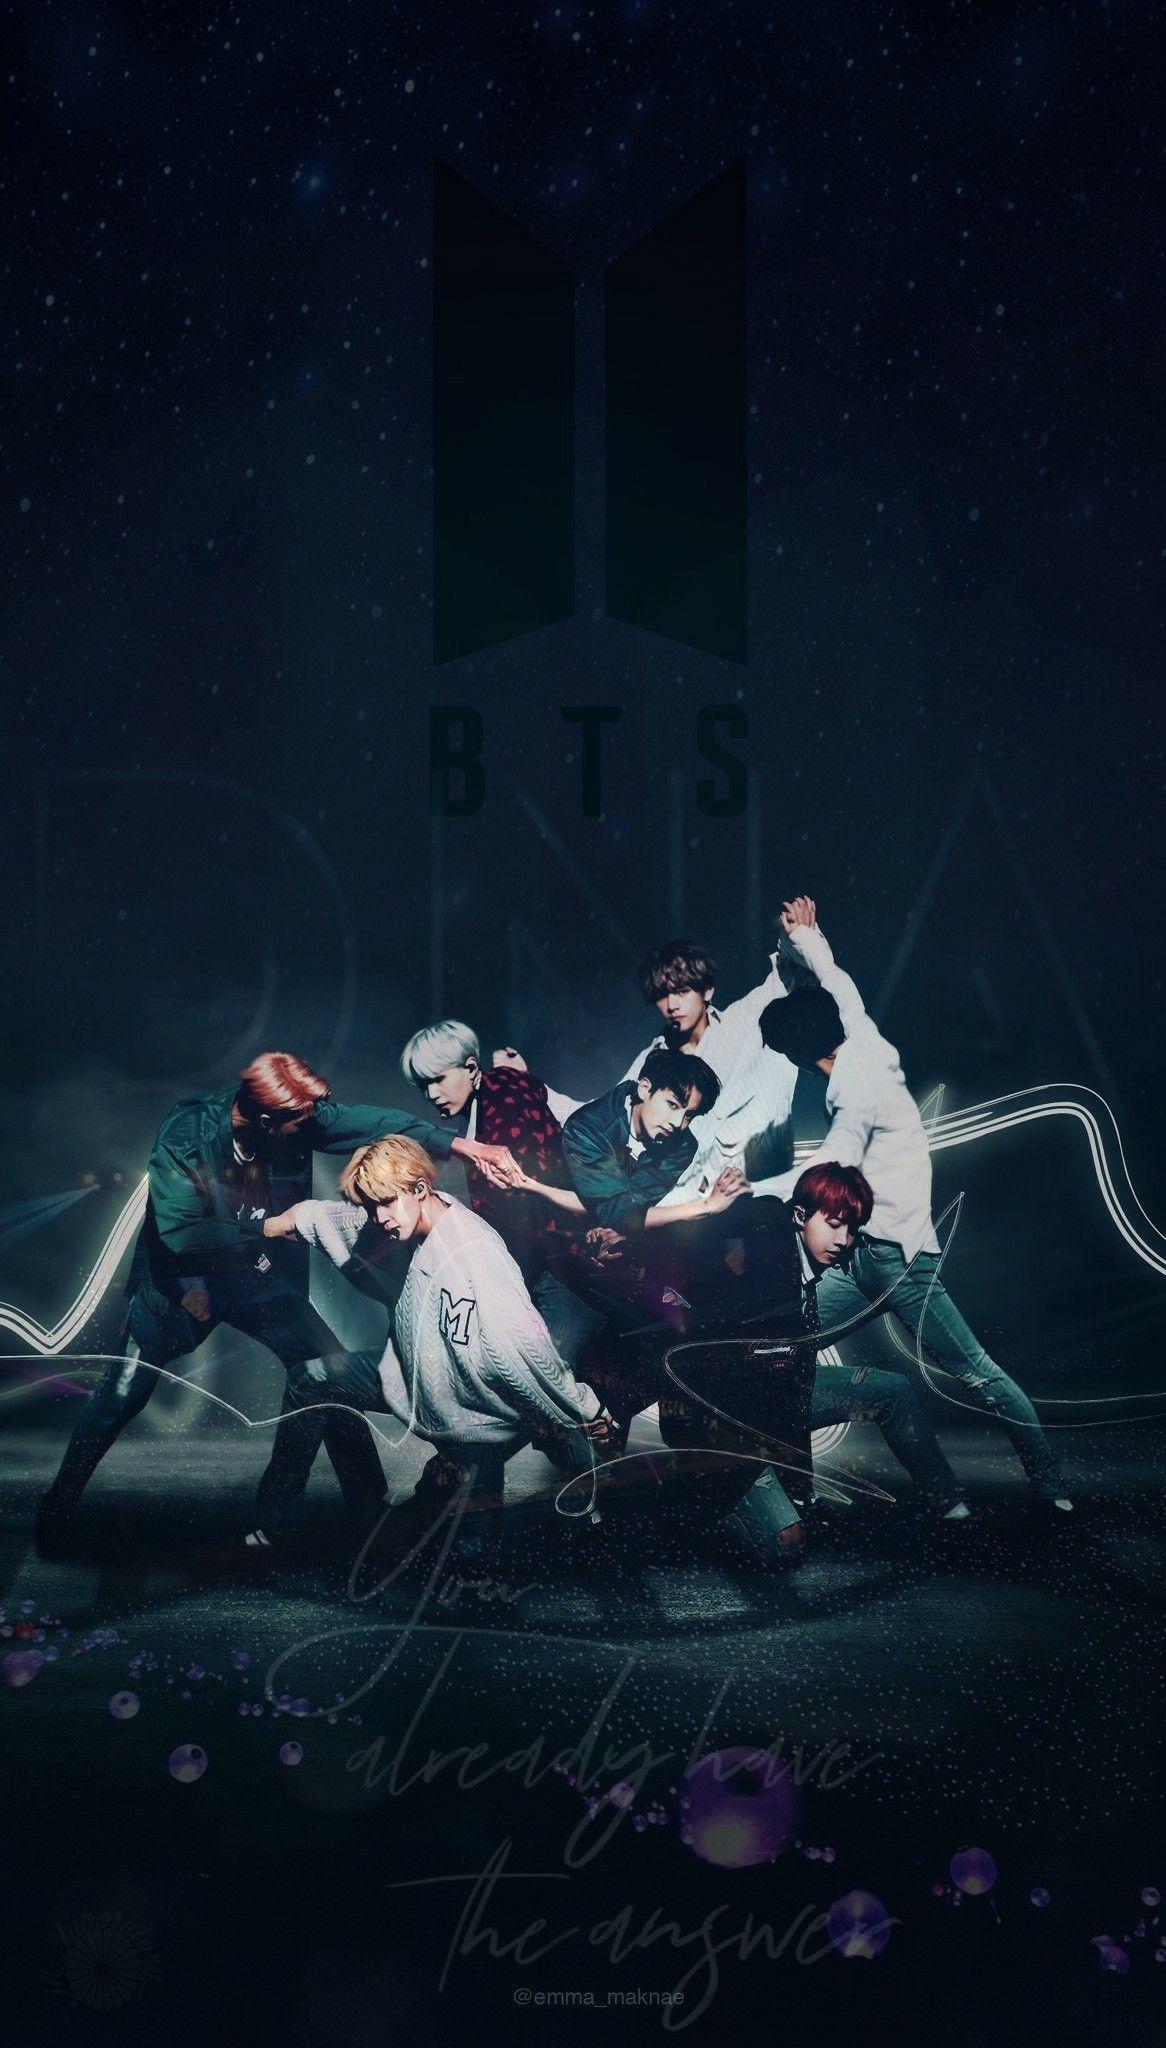 BTS ARMY Wallpapers   ShareChat Photos and Videos